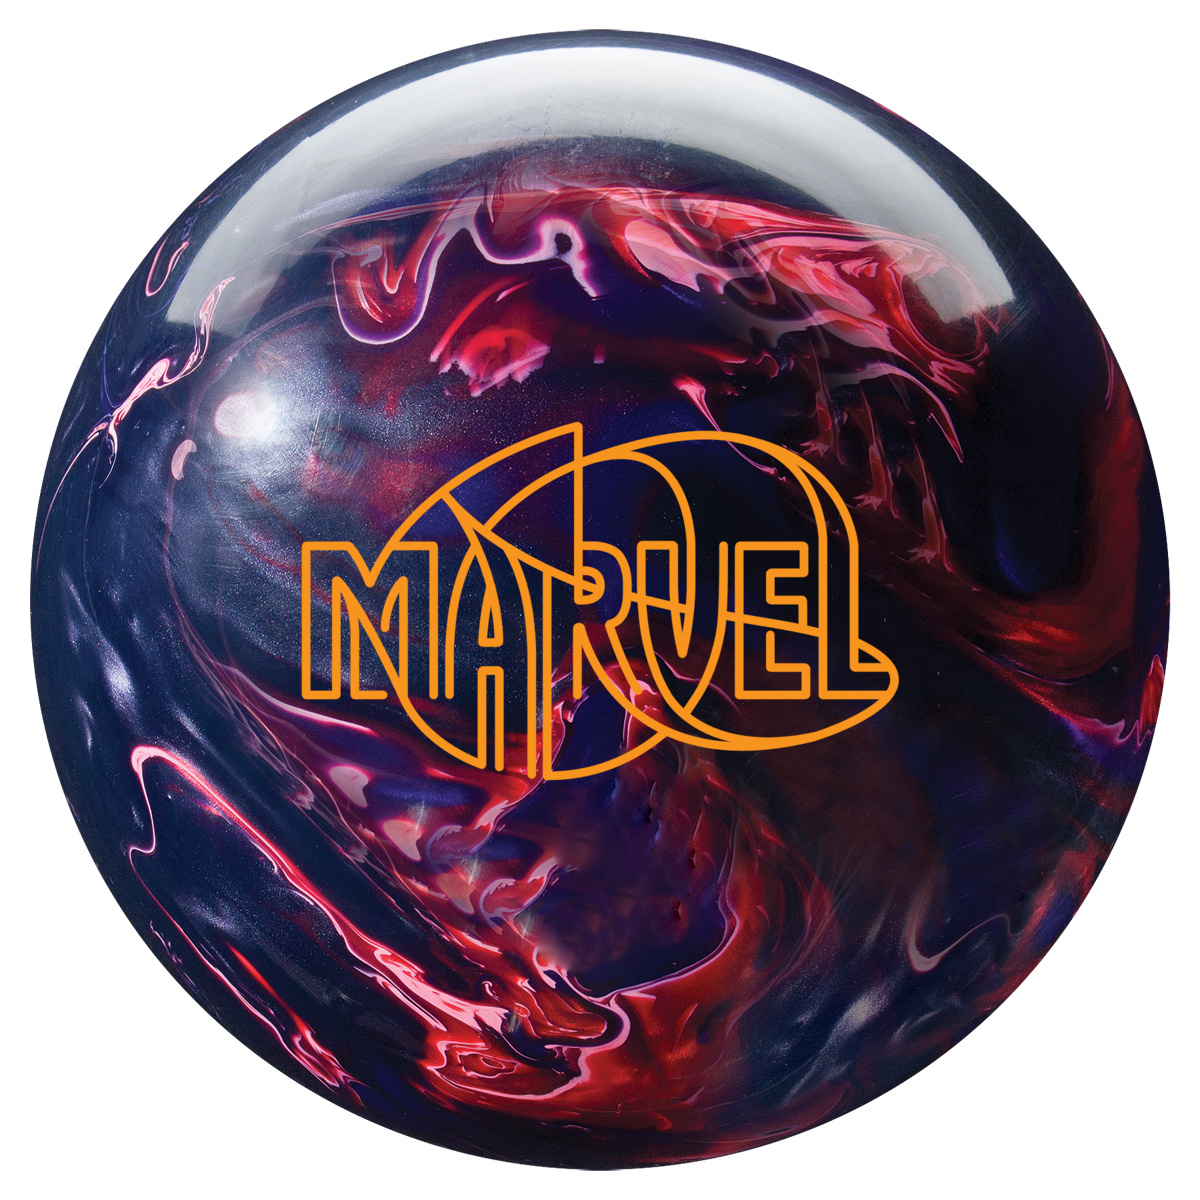 Storm Marvel Pearl Bowling Ball Review Tamer Bowling